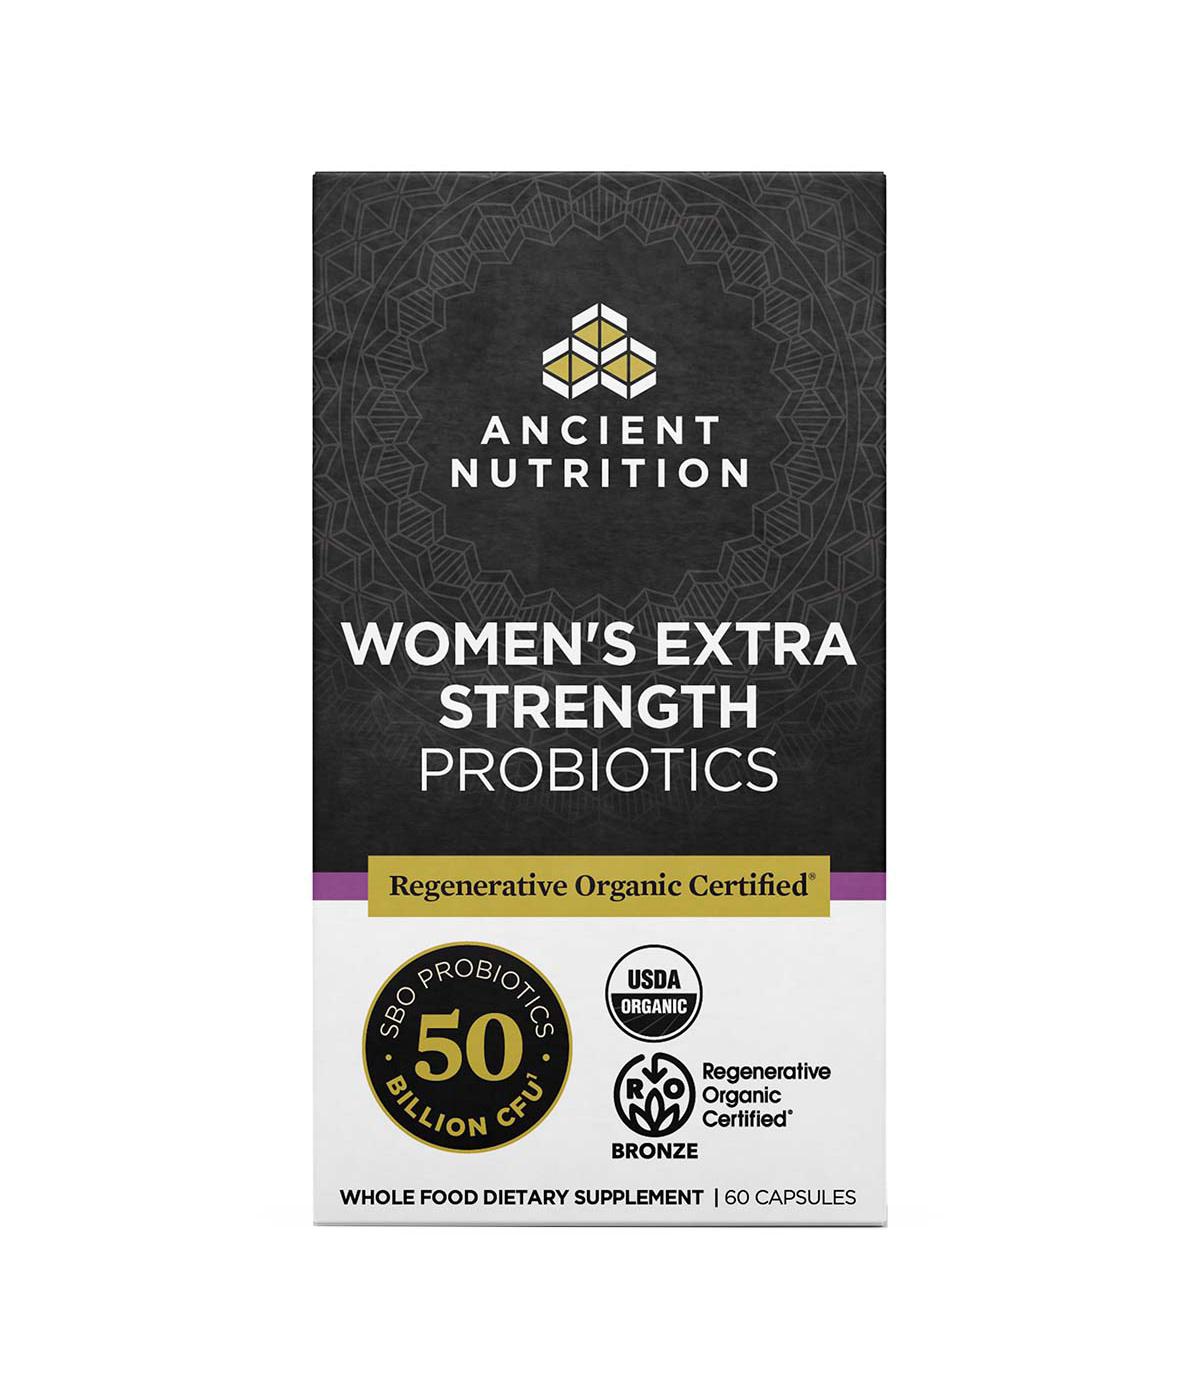 Ancient Nutrition Women's Extra Strength Probiotics Capsules; image 1 of 5